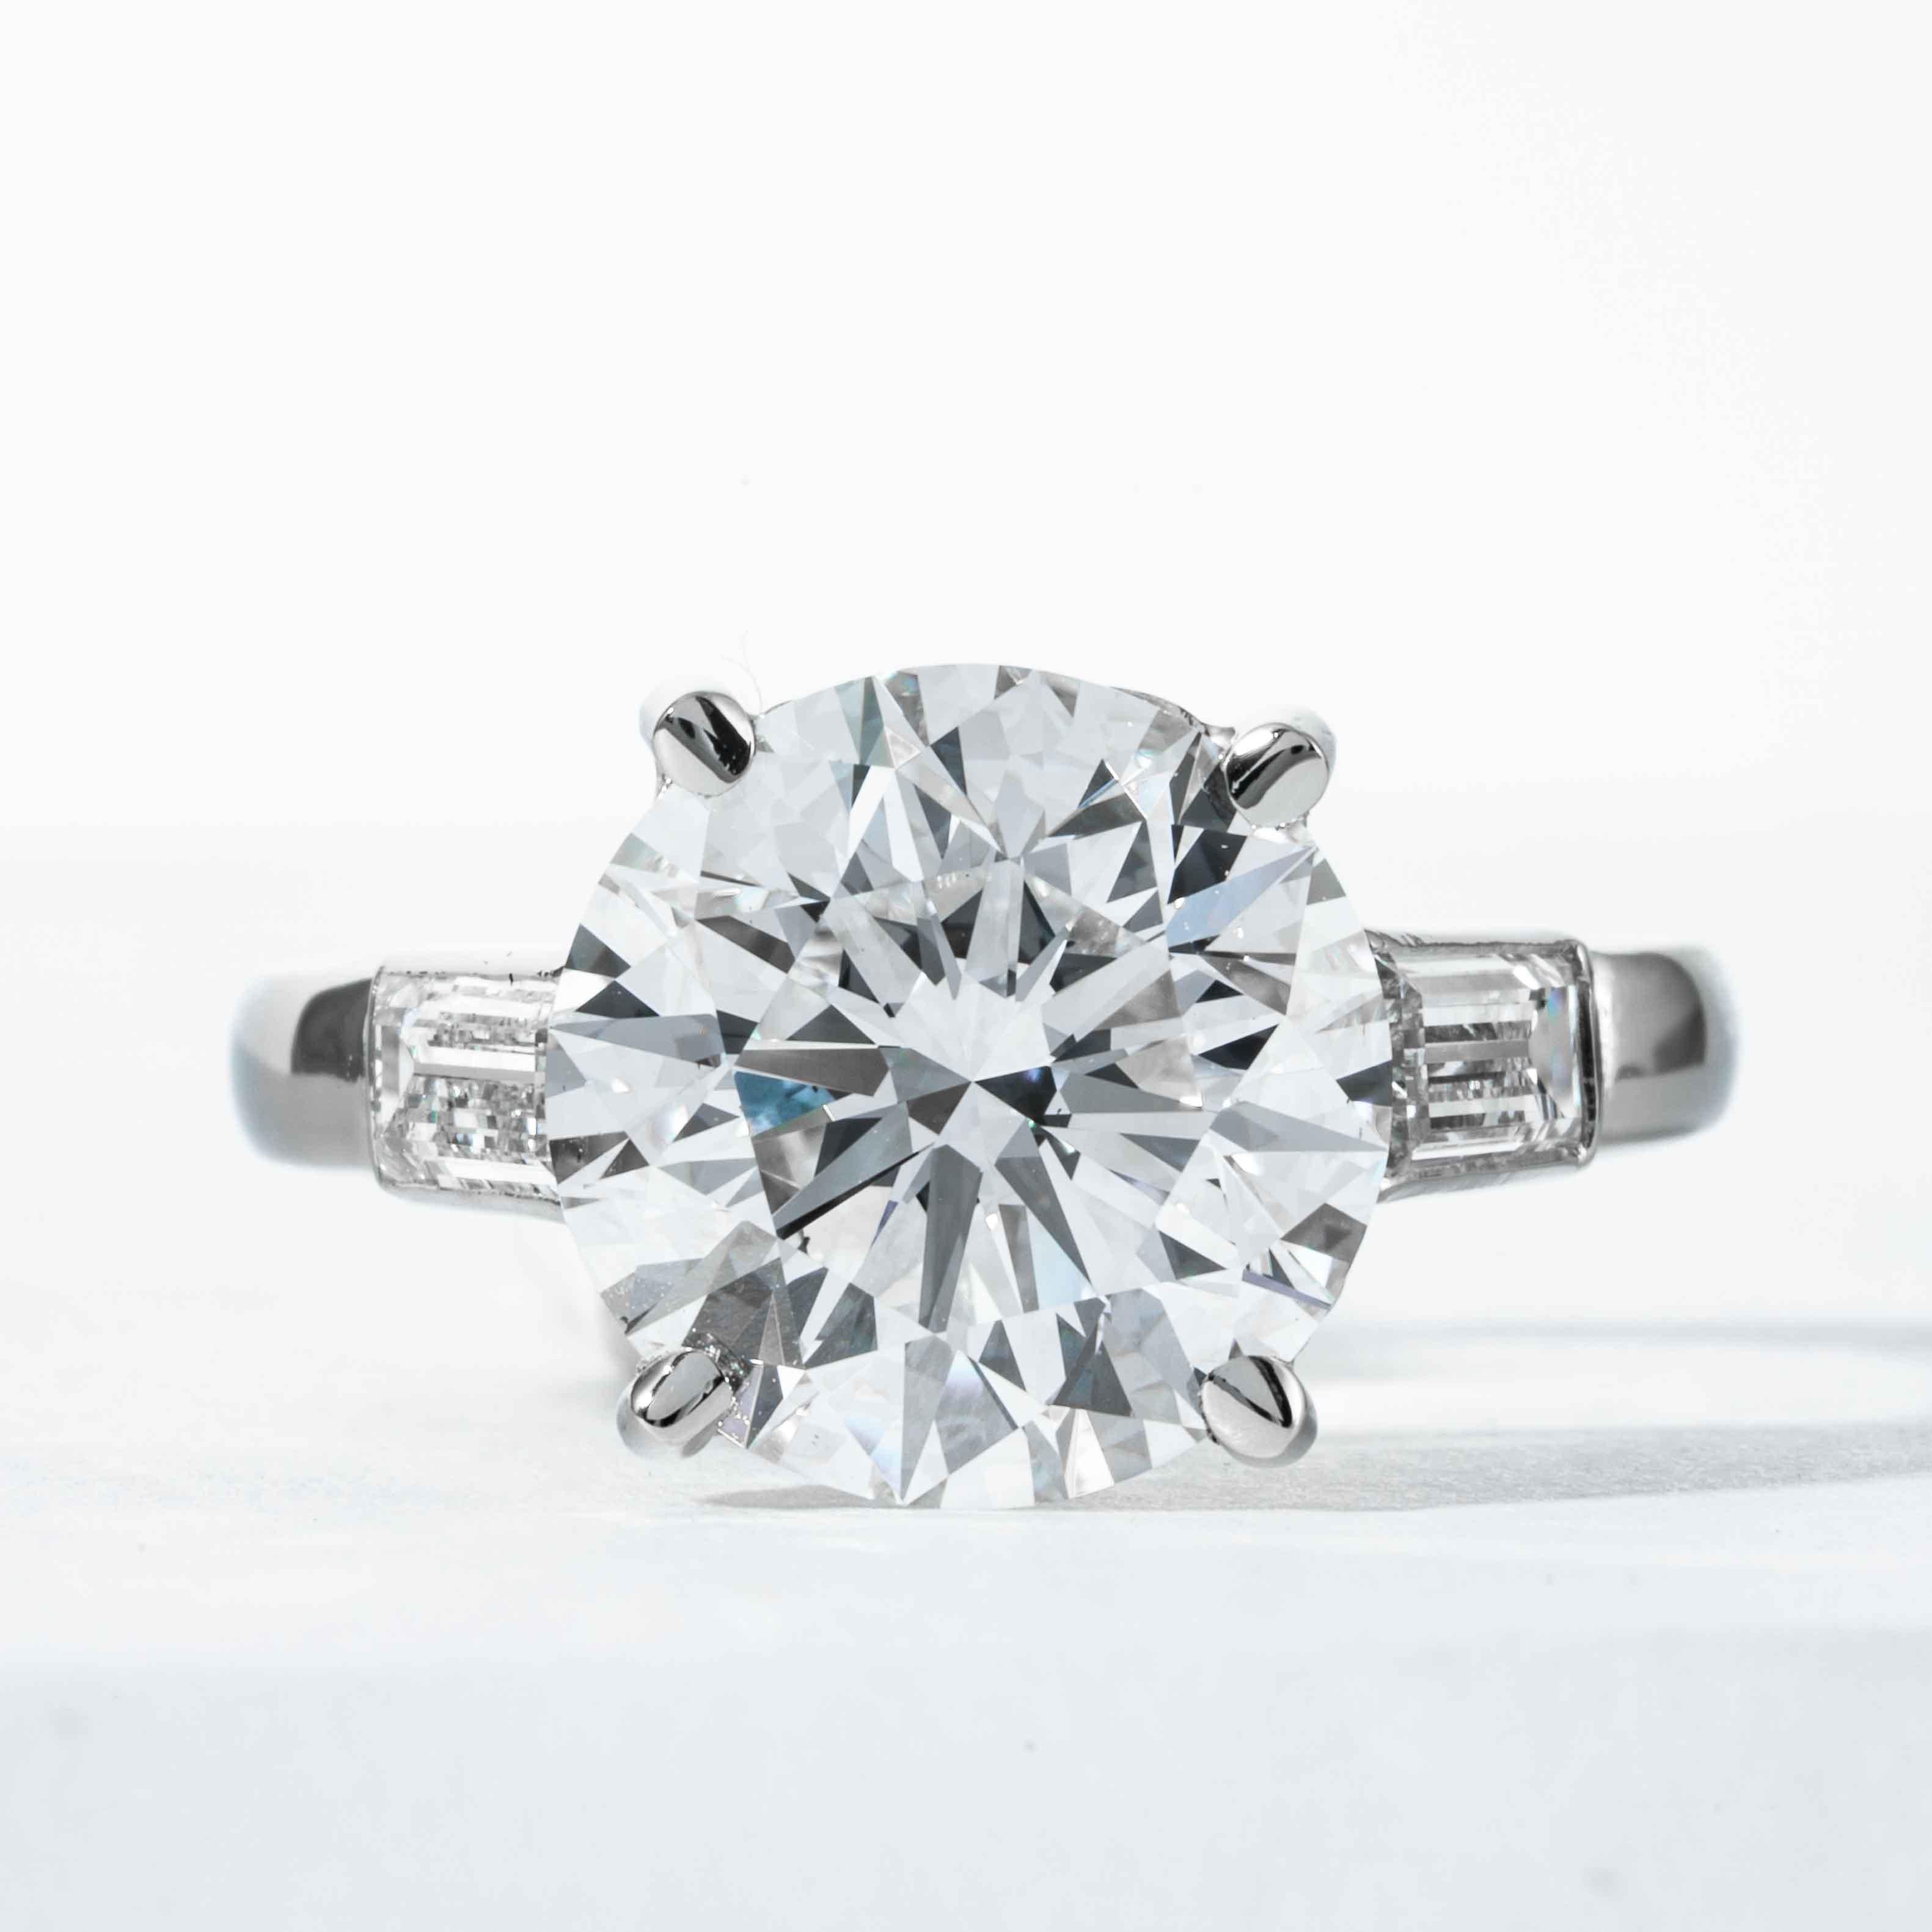 This diamond ring is being offered by Shreve, Crump & Low.  This 4.72 carat GIA certified D SI1 round brilliant cut triple excellent diamond measuring 10.72 - 10.79 x 6.69 mm is custom set in a handcrafted Shreve, Crump & Low platinum ring.  The